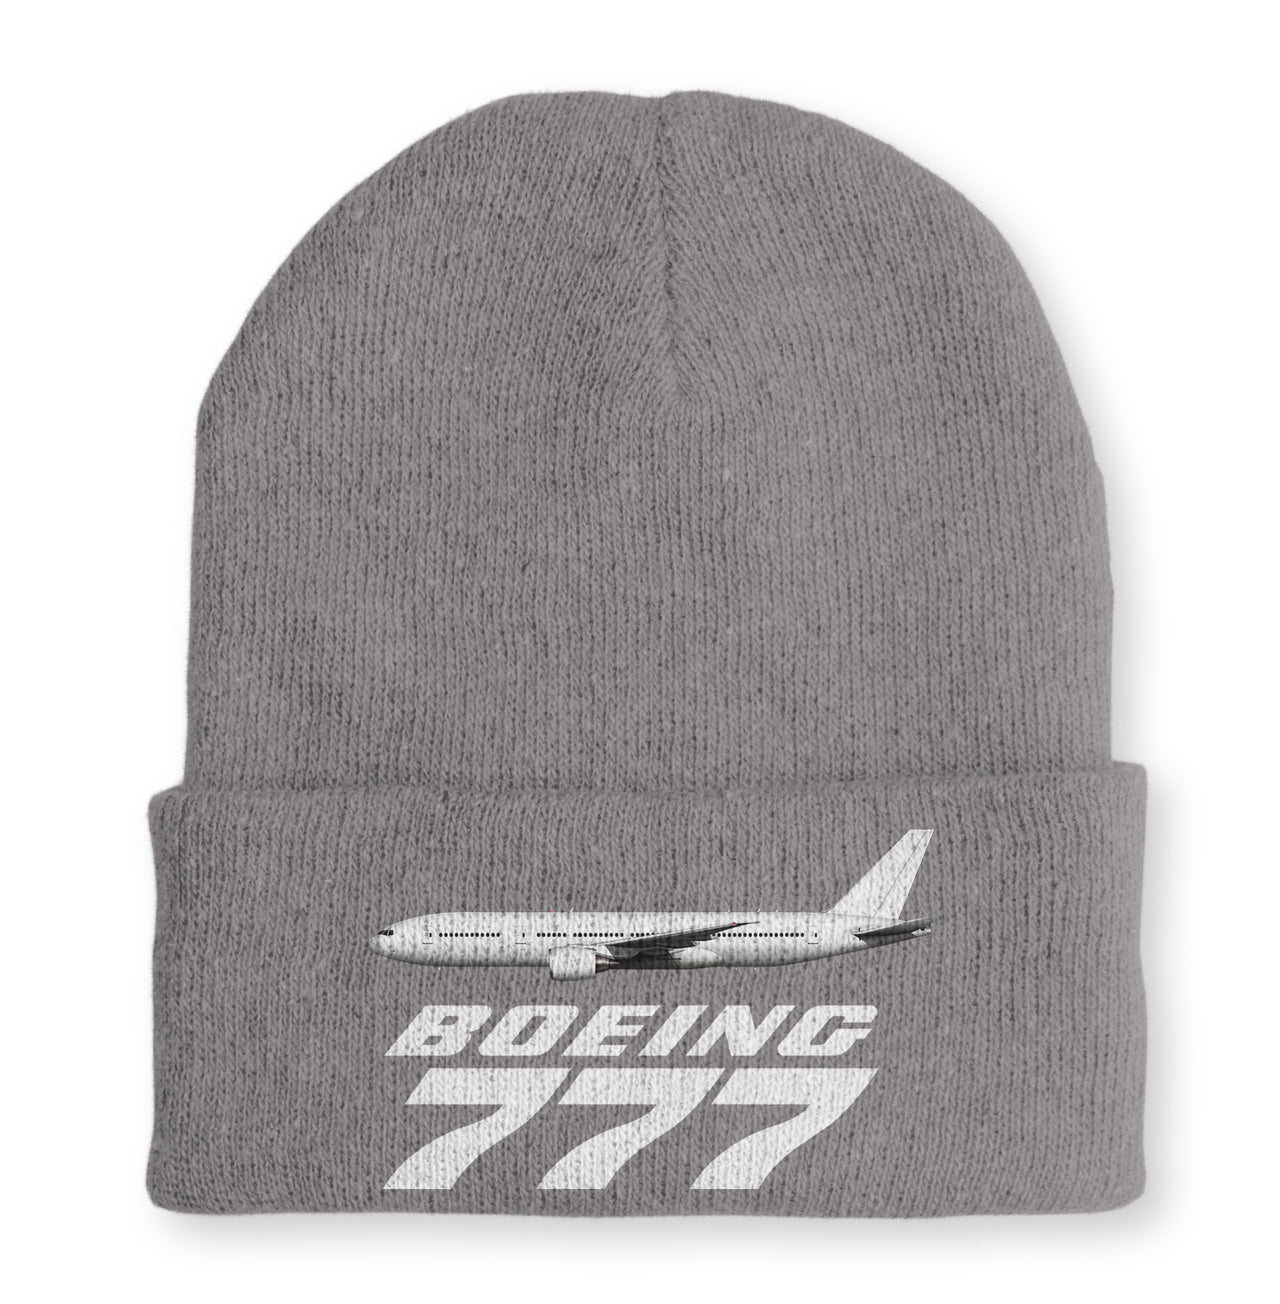 The Boeing 777 Embroidered Beanies